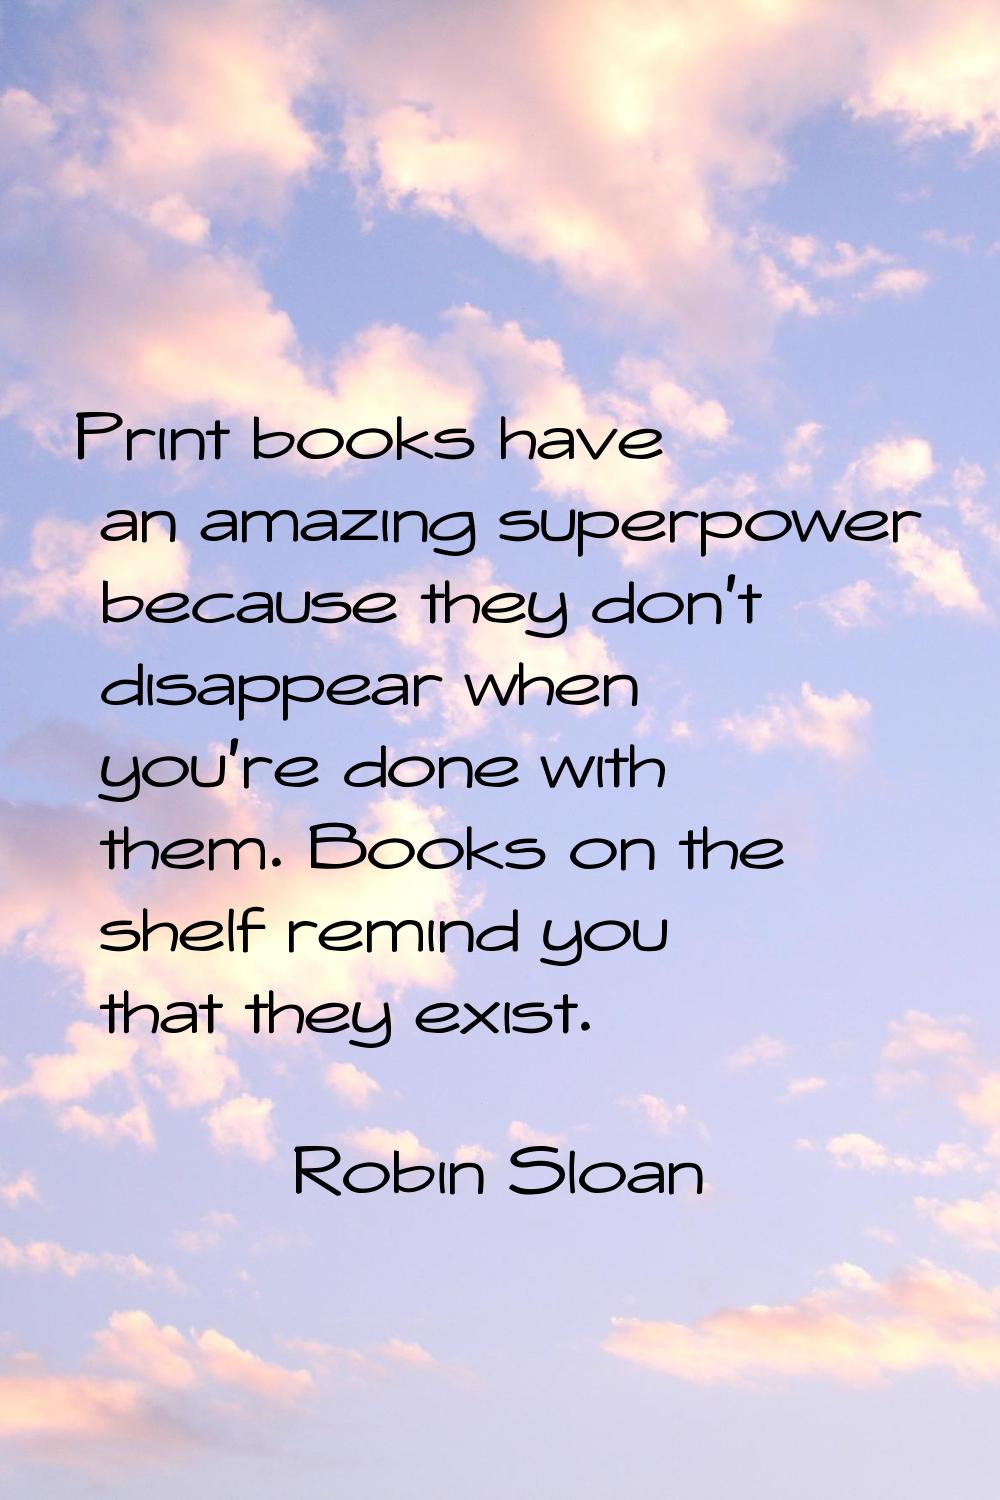 Print books have an amazing superpower because they don't disappear when you're done with them. Boo